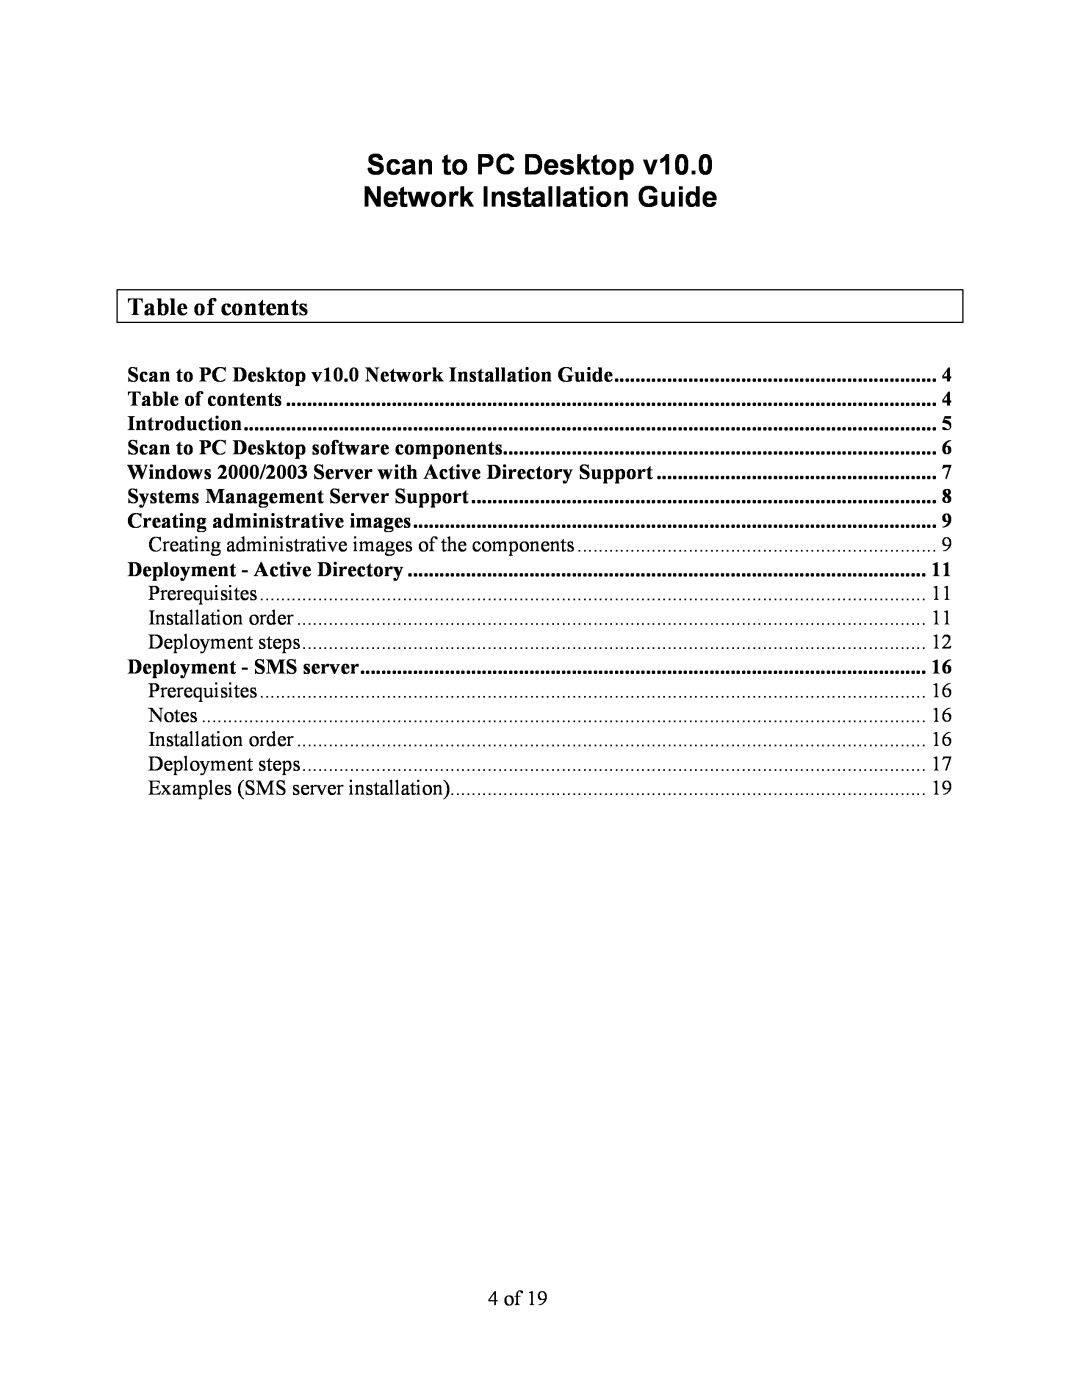 Xerox 10 manual Table of contents, Scan to PC Desktop Network Installation Guide 